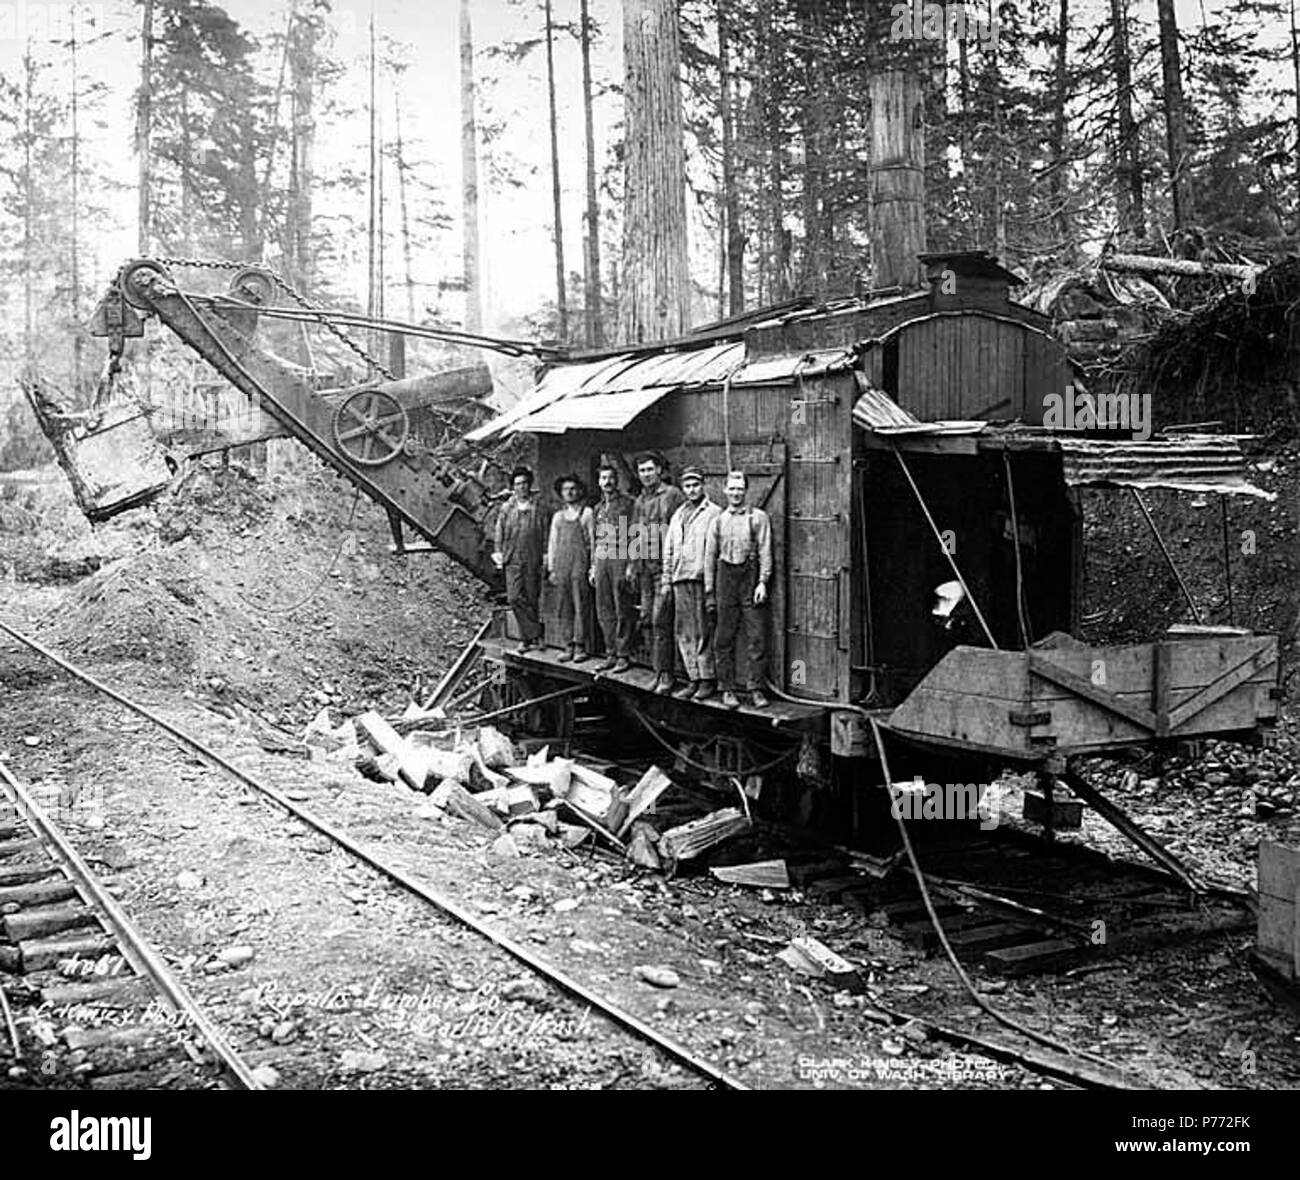 . English: Construction crew and steam shovel, Copalis Lumber Company, near Carlisle, ca. 1918 . English: Caption on image: Copalis Lumber Co., Carlisle, Wash. C. Kinsey Photo, Seattle. No. 51 PH Coll 516.817 The Copalis Lumber Company was in business in Carlisle from 1914 to 1920. It's logging railroad was absorbed into the Carlisle Lumber Company. Carlisle is a small settlement on the Copalis River four miles east of the Pacific Ocean in southwest Grays Harbor County. When established in 1912 by the Carlisle Lumber Company, it was a busy logging and sawmill center. It continued to be active  Stock Photo